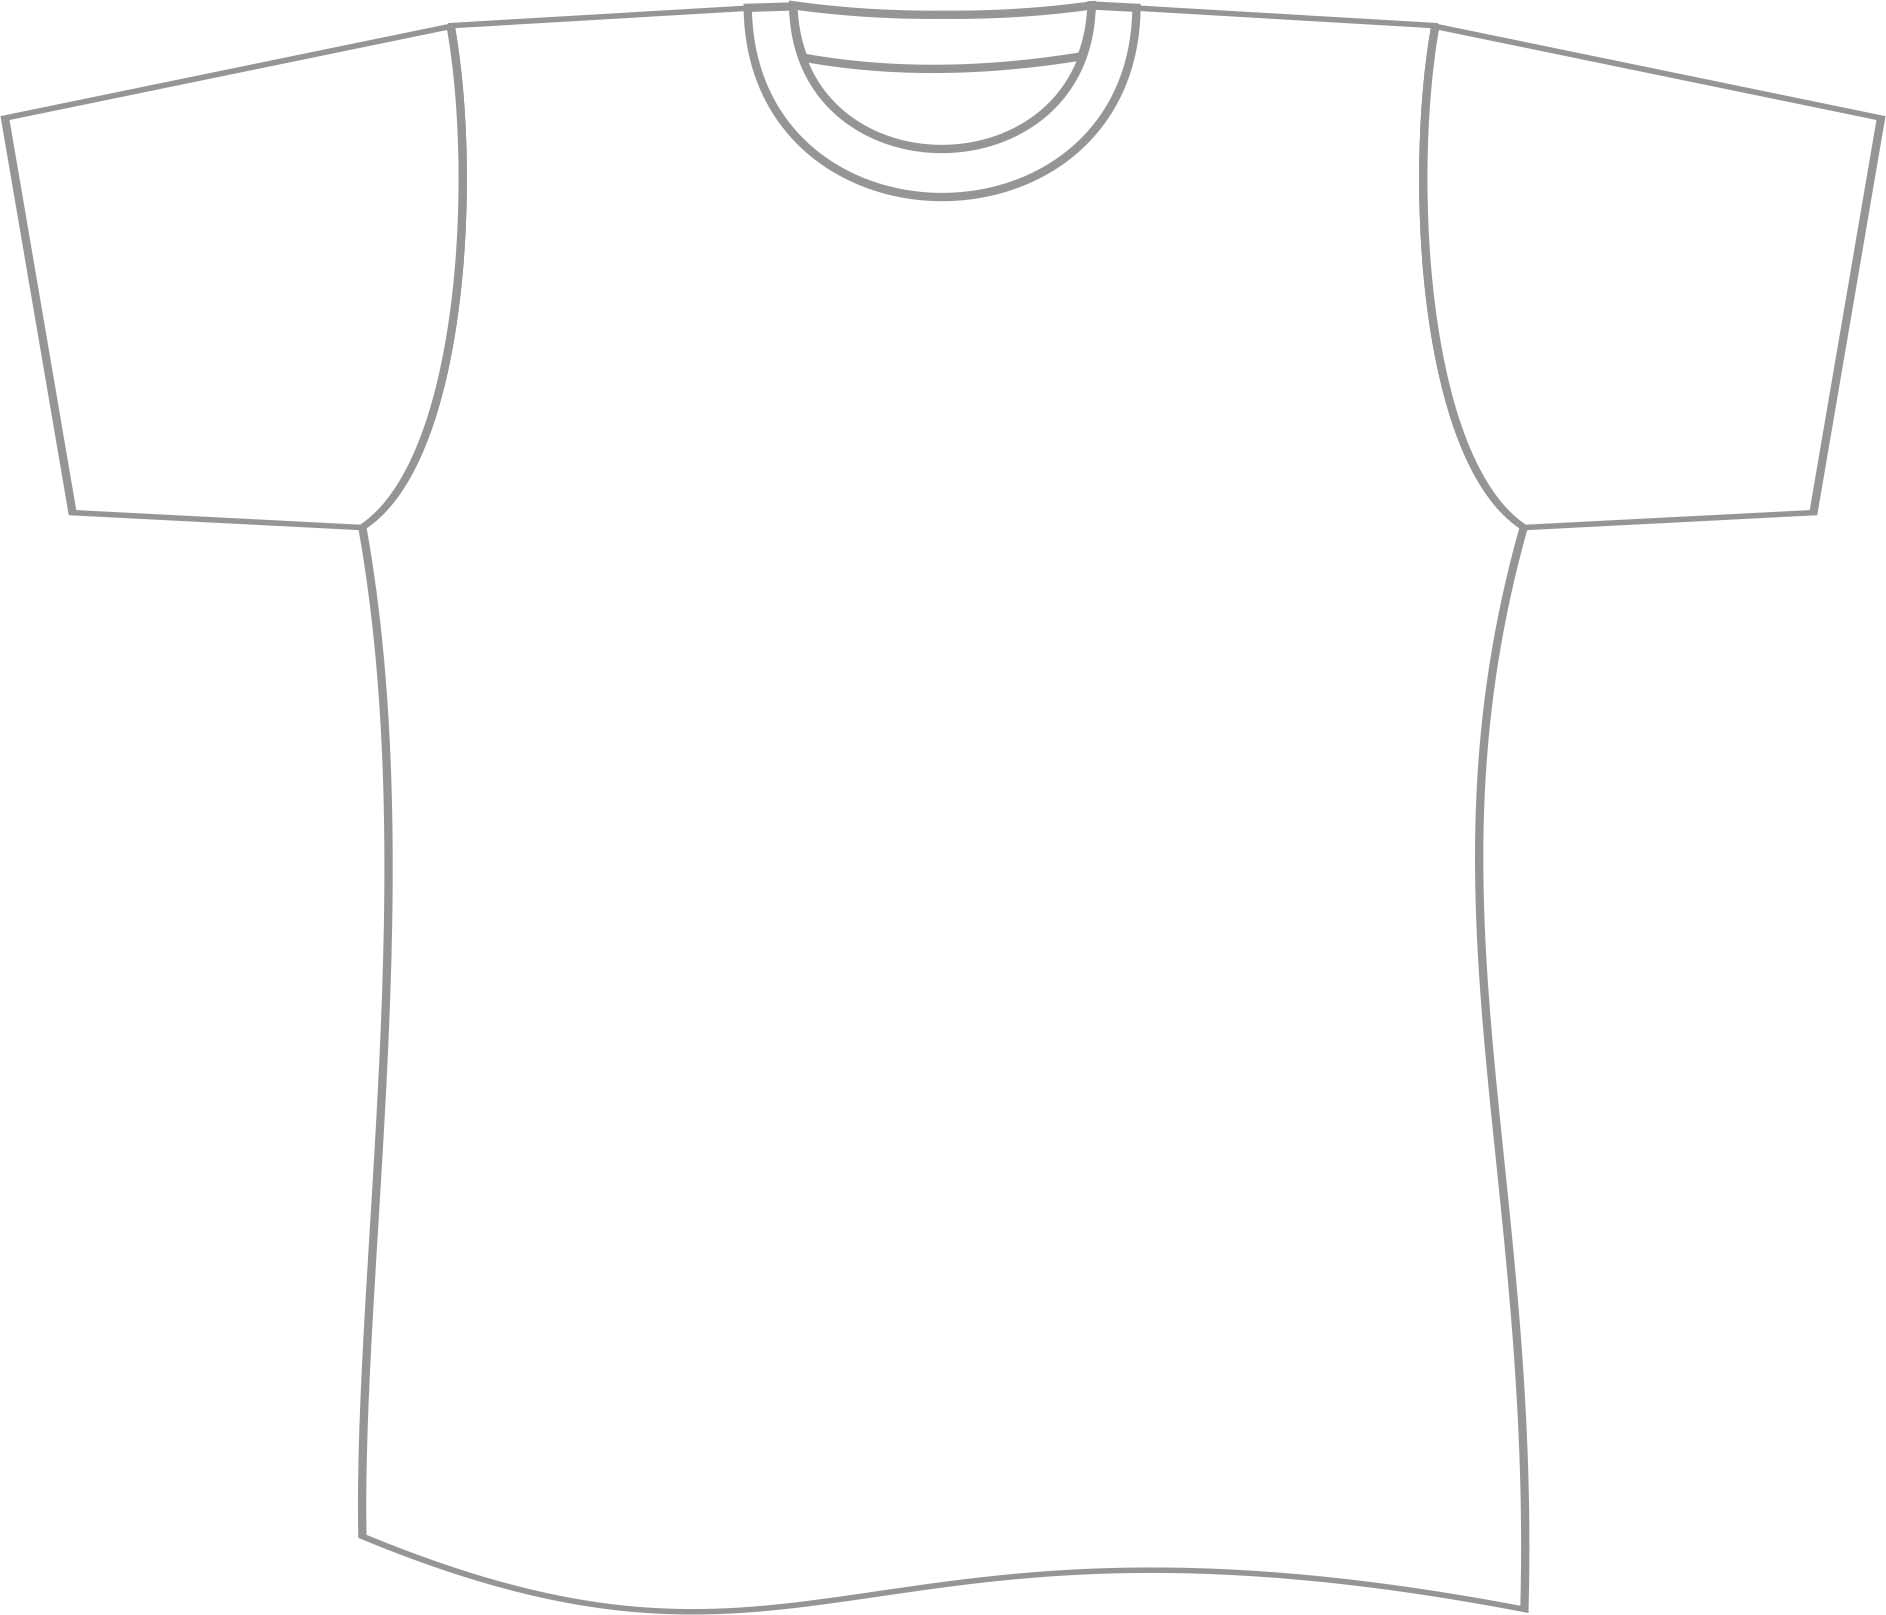 Free T Shirt Template Printable Download Free Clip Art Free Clip